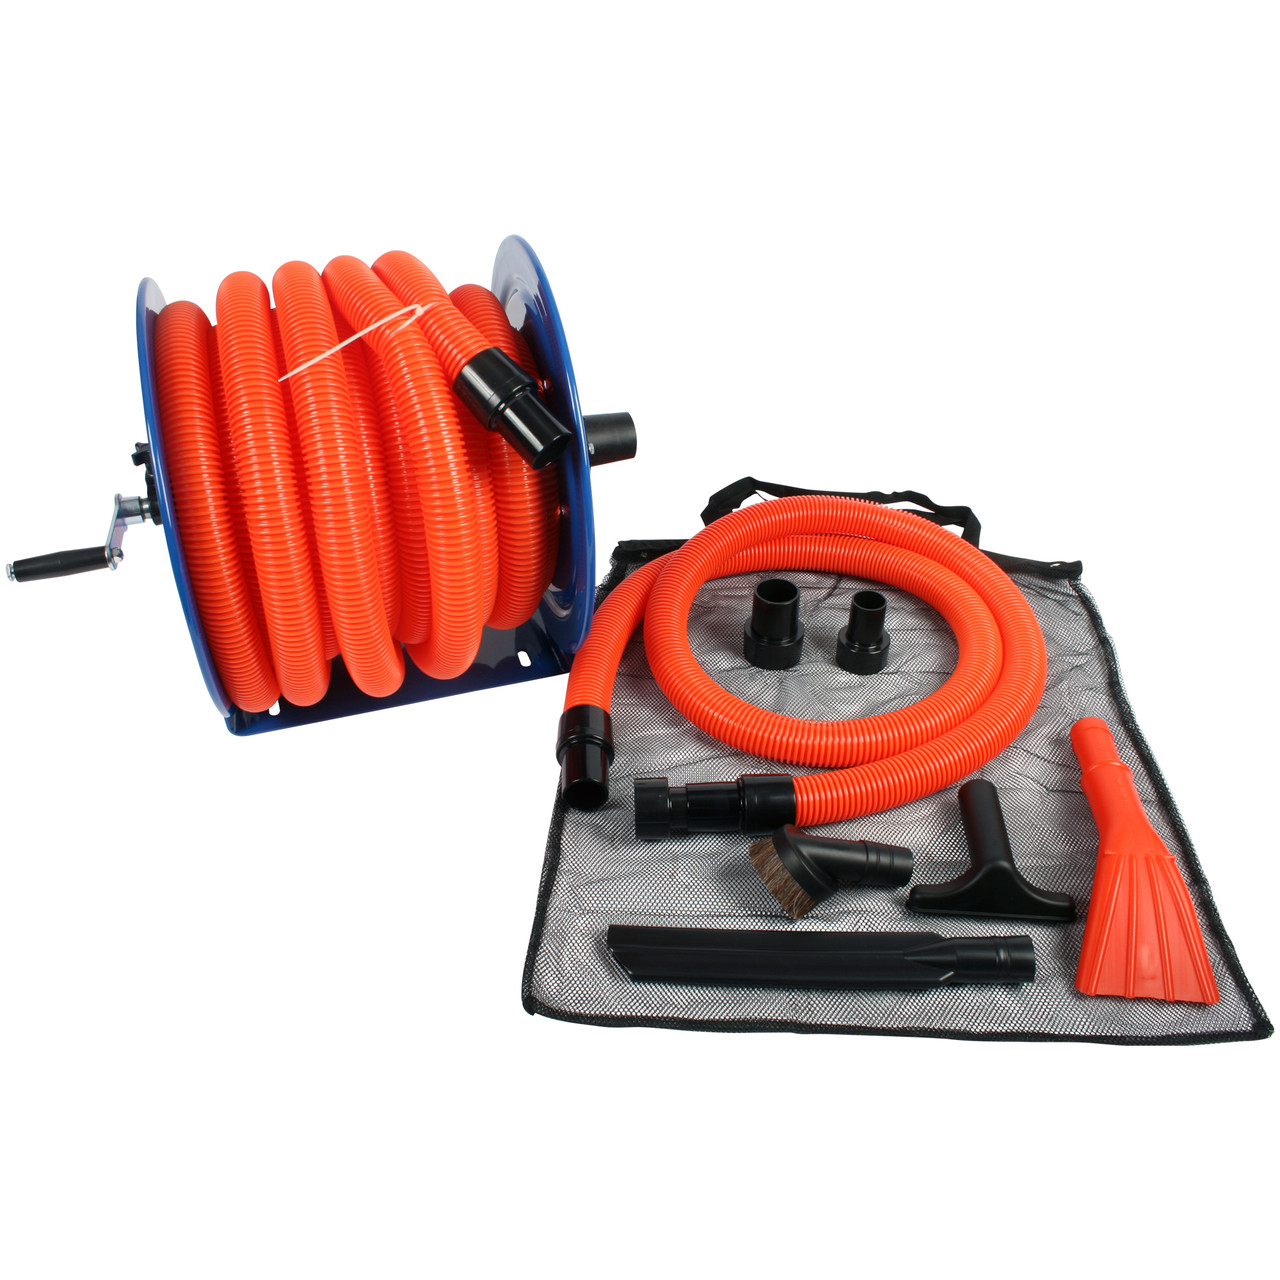 Industrial grade Steel Hose Reel and Wet/Dry Vacuum Attachment Kit, Orange  - Cen-Tec Systems